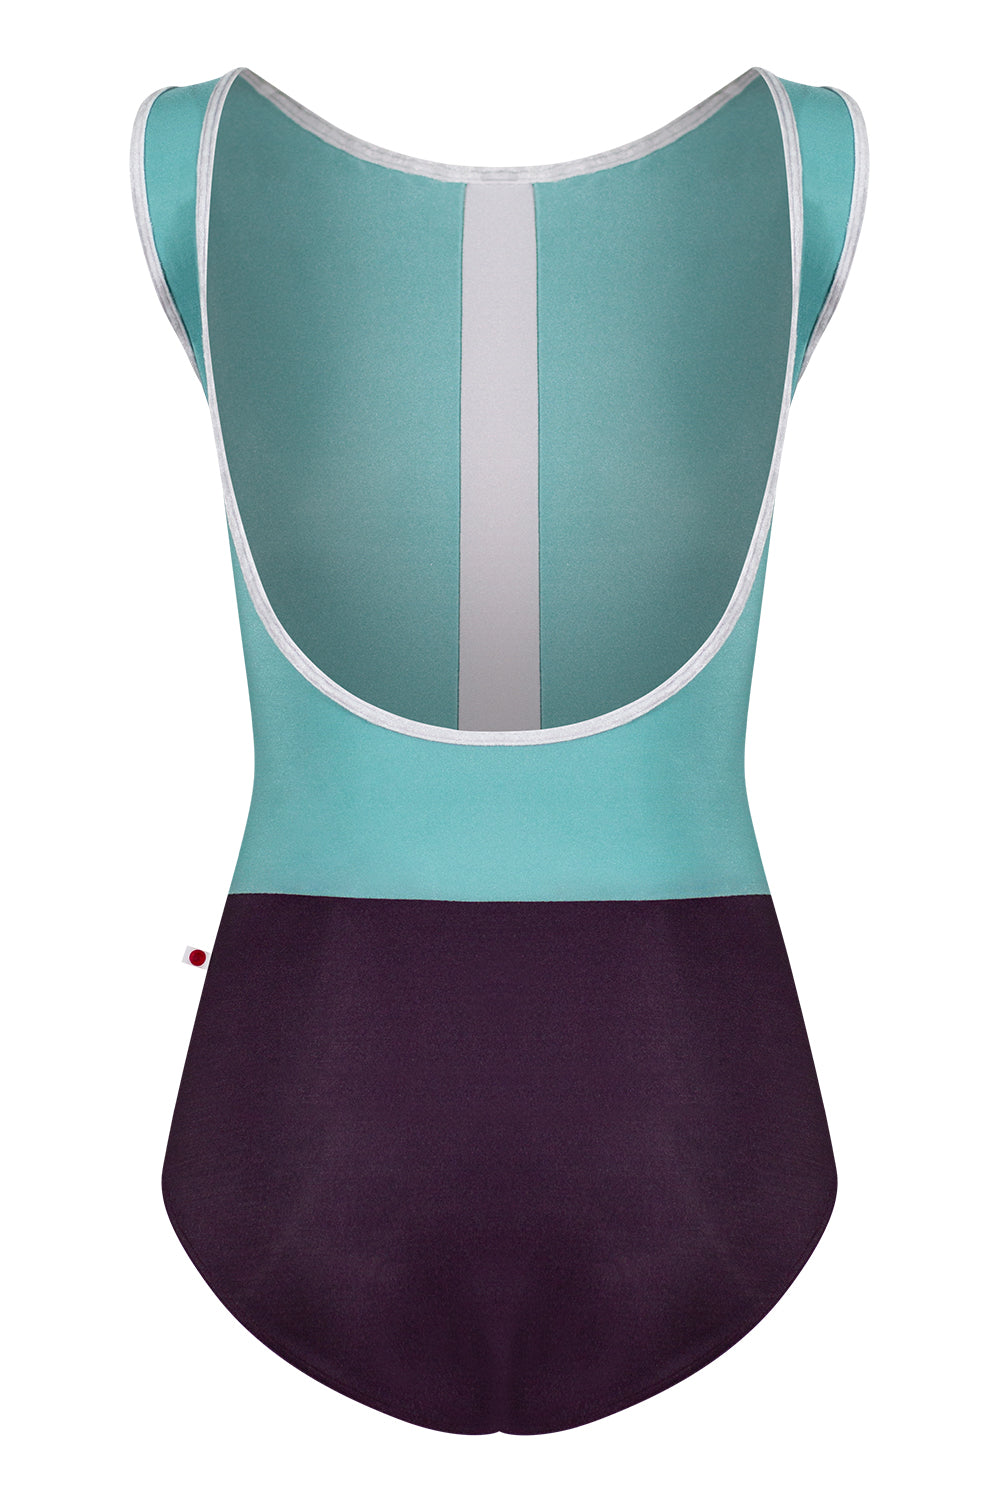 Didi leotard in N-Eggplant body color with N-Cactus top color, N-Silver stripe and CV-Silver trim color